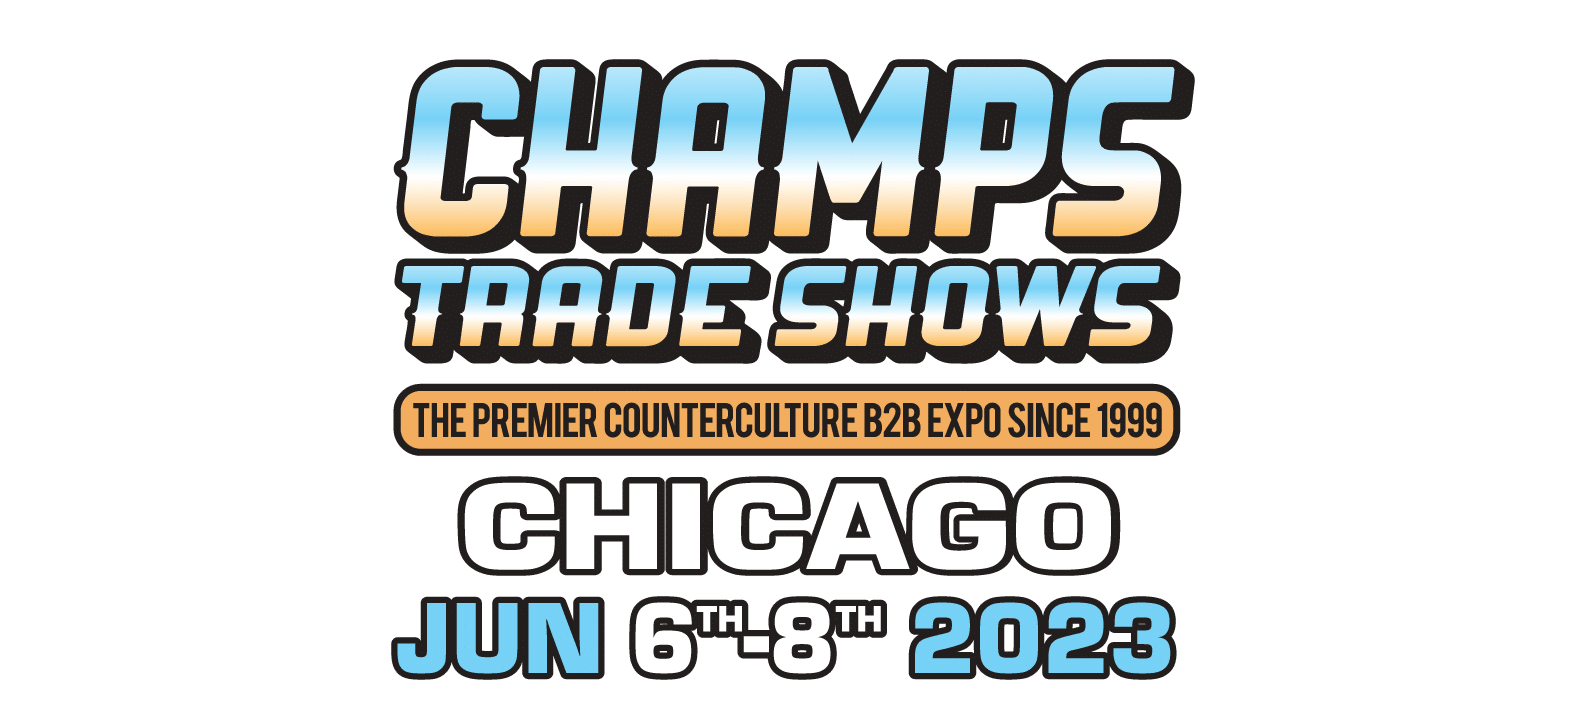 Welcome to CHAMPS - Chicago 2023